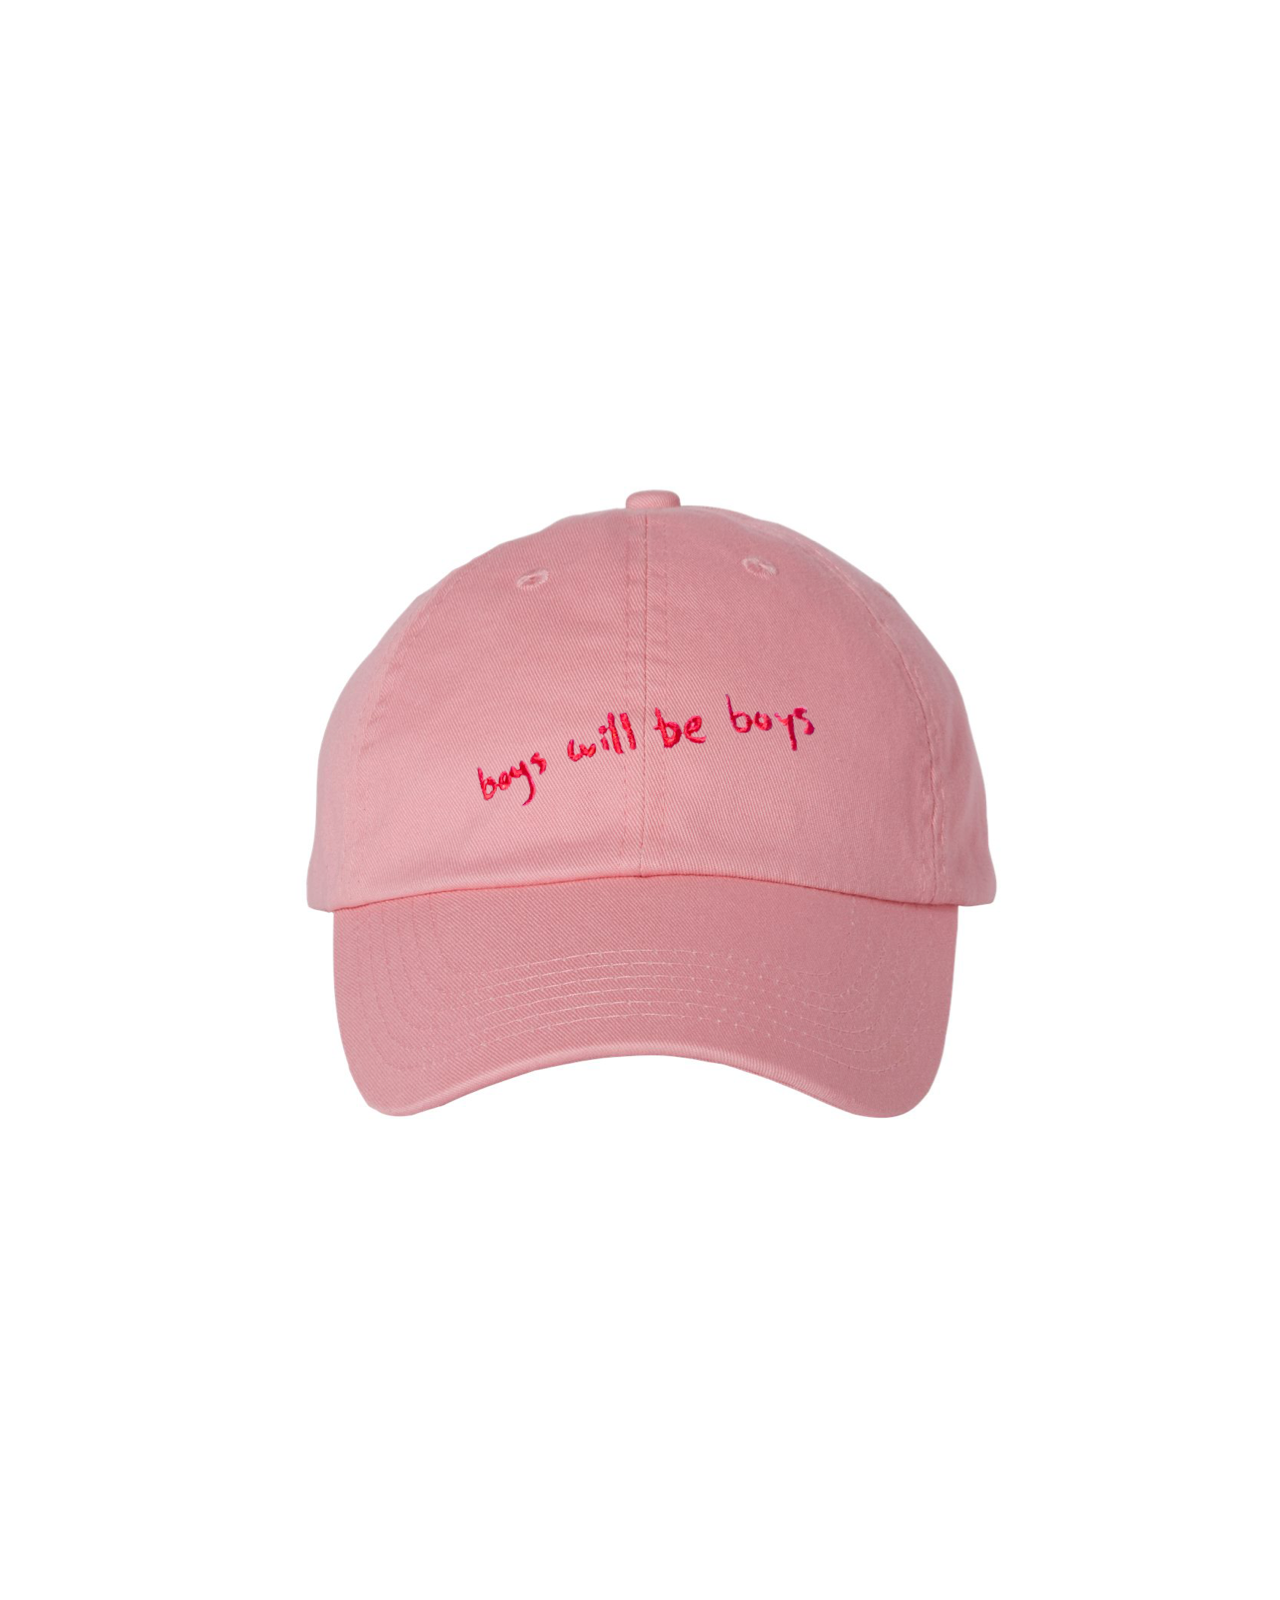 BOYS WILL BE BOYS DAD HAT PINK